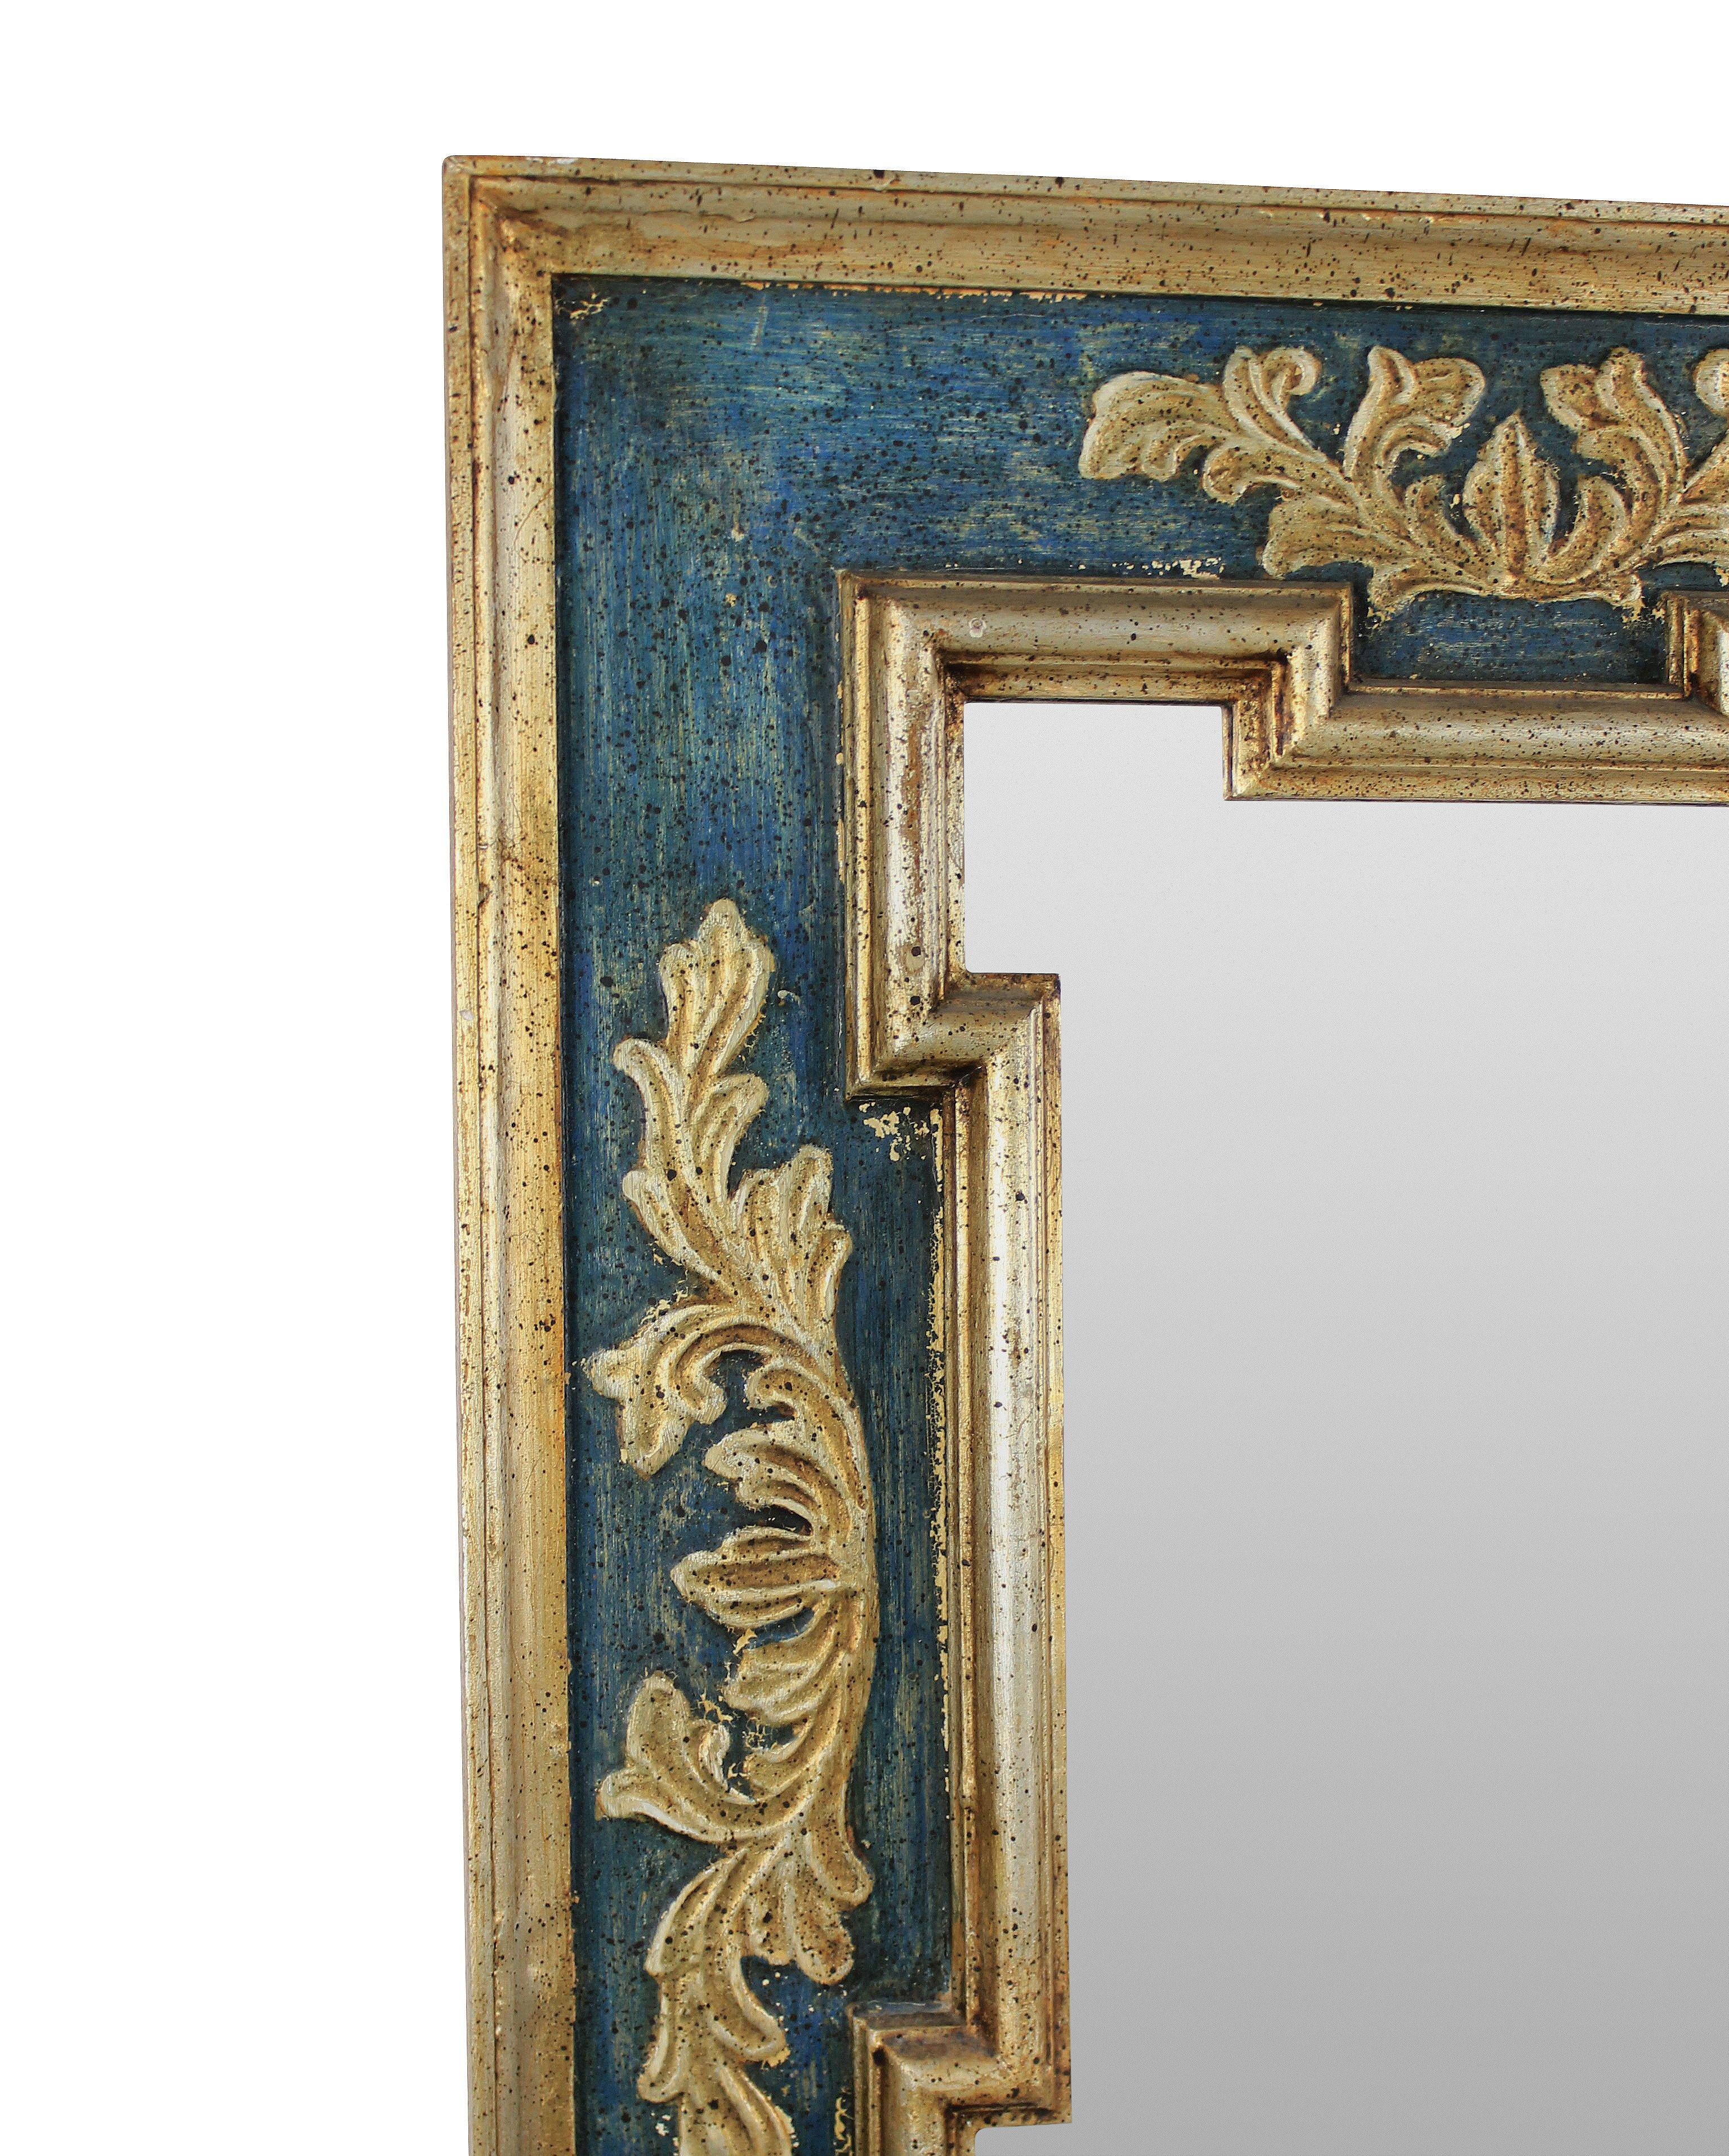 A mid-century florentine mirror in a green painted finish with gold and silver leaf, in the 18th century style.